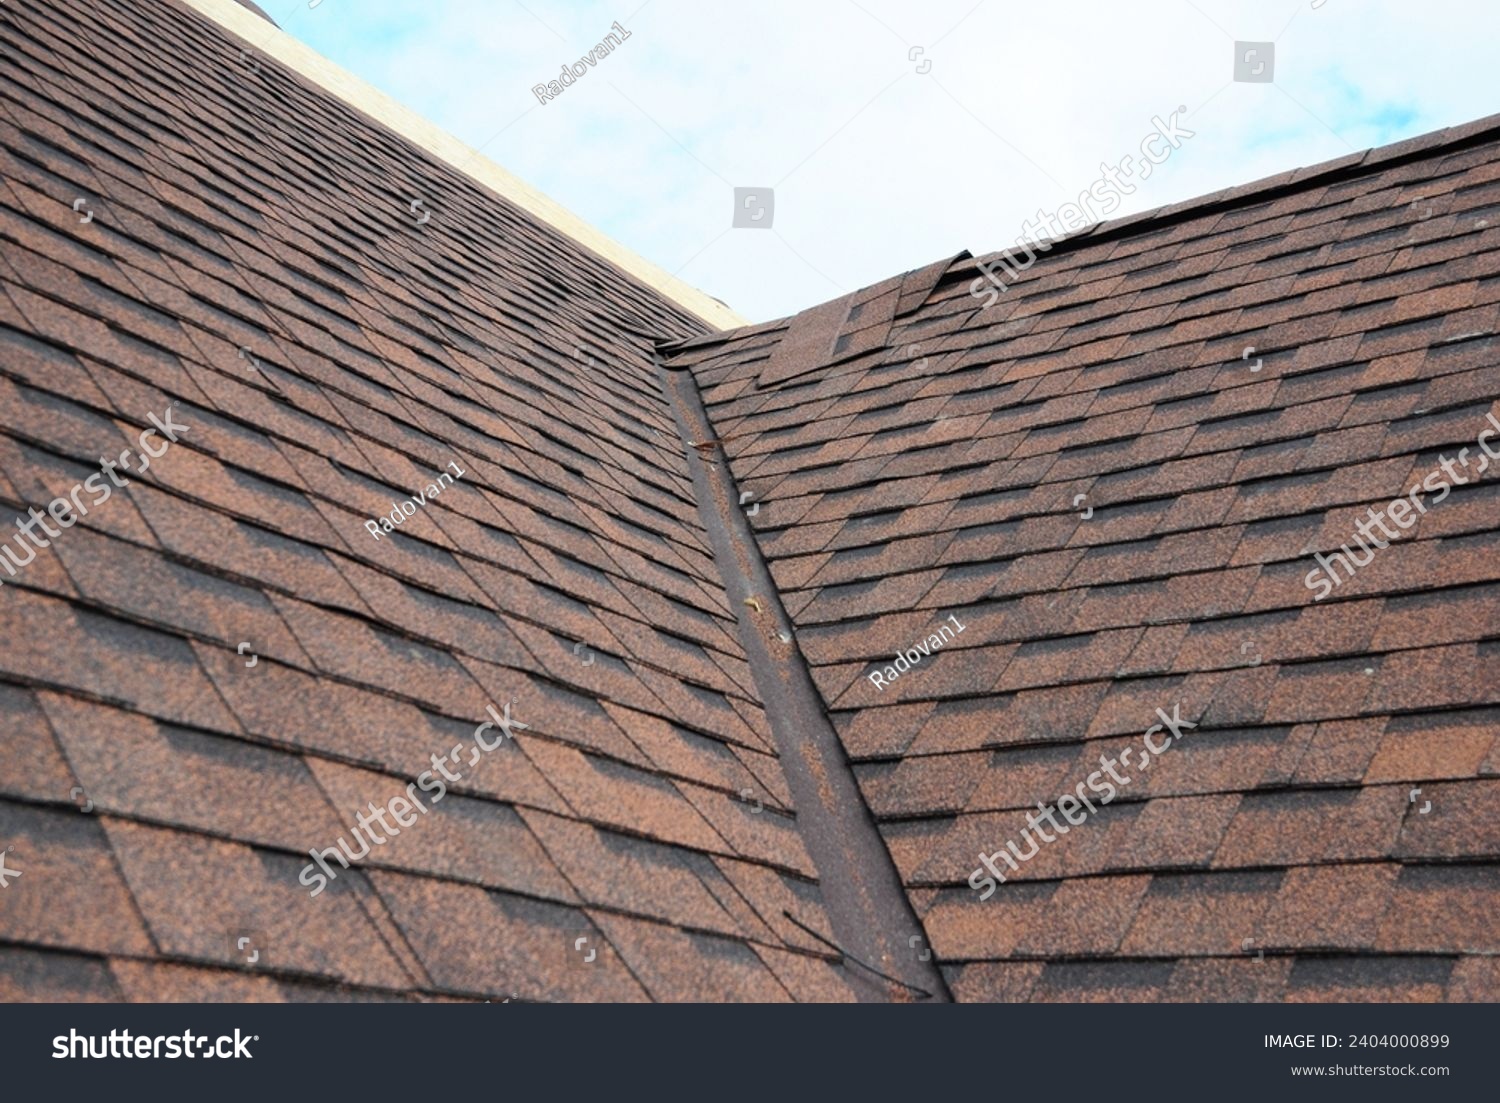 Asphalt shingles roofing construction, repair, installation, replace, renovation. Problem Areas for House Asphalt Shingles Corner Roofing Construction Waterproofing. #2404000899